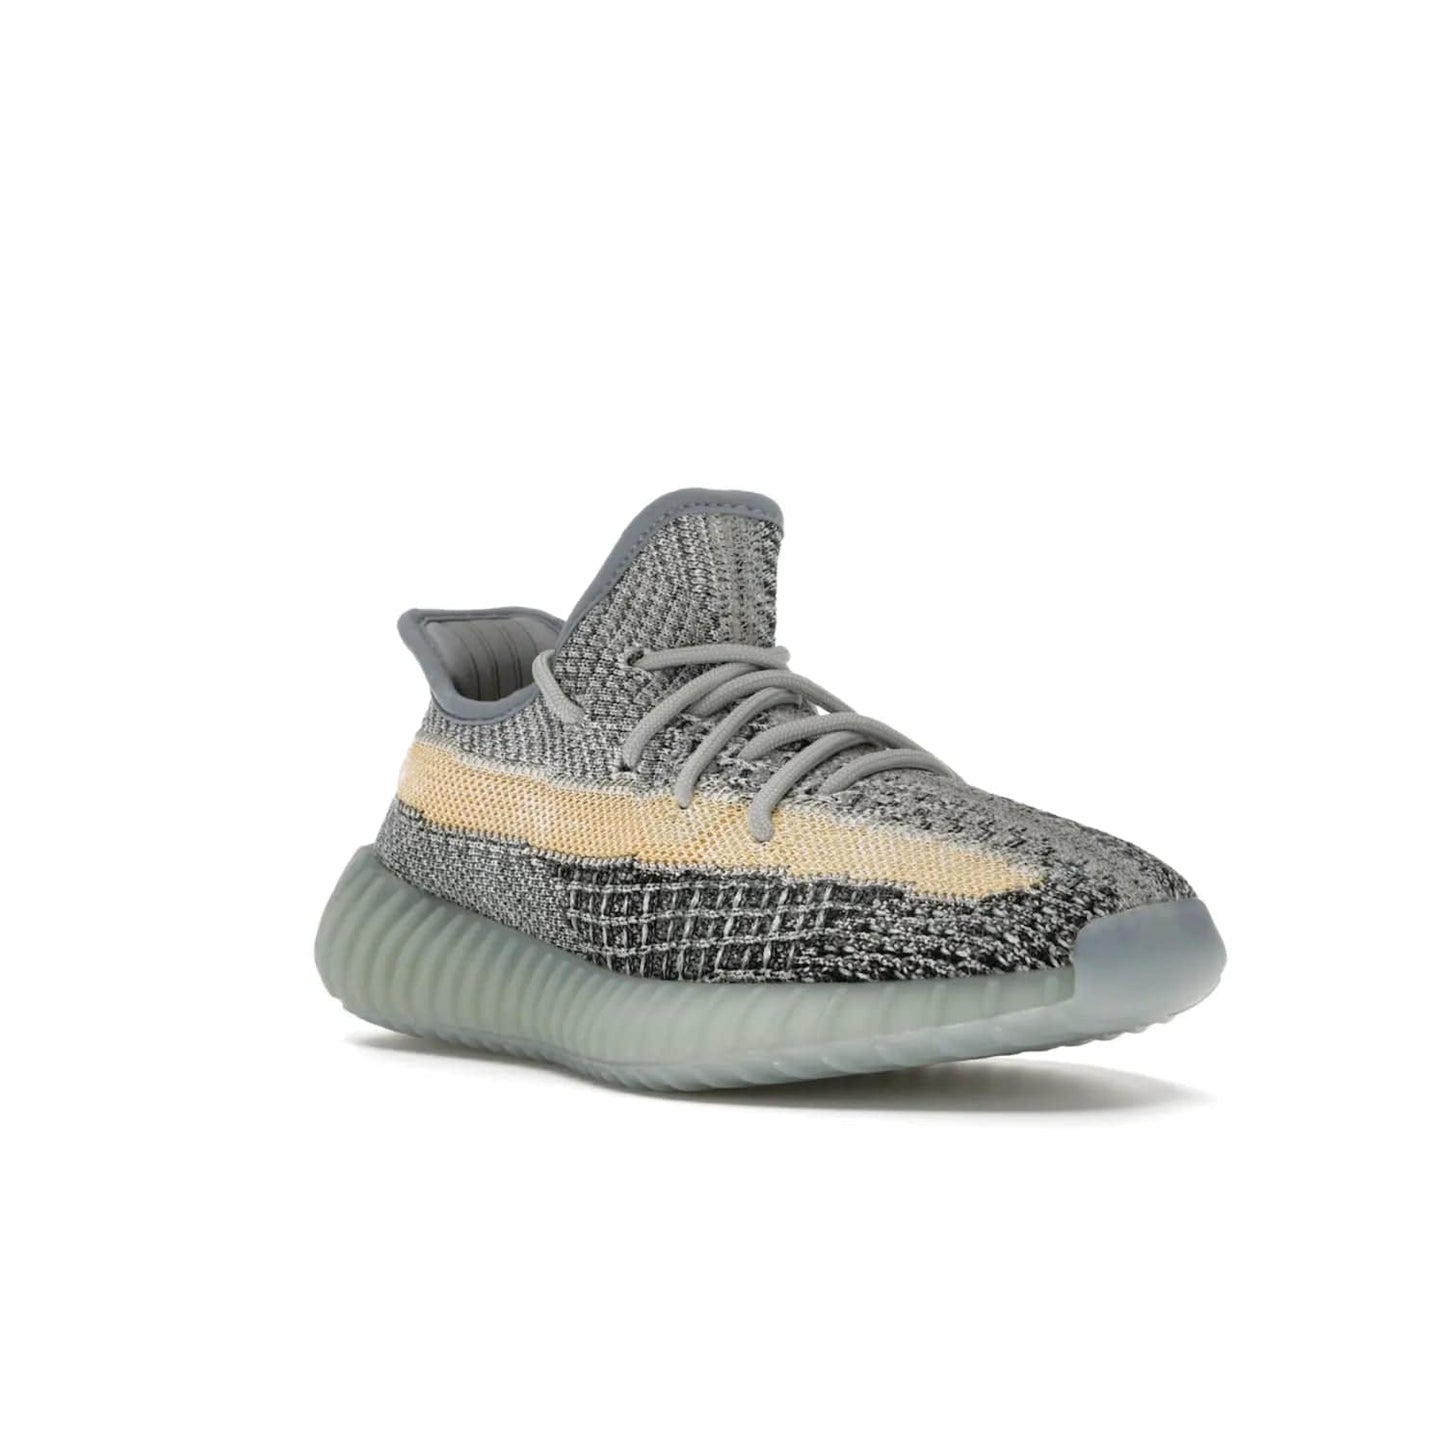 adidas Yeezy Boost 350 V2 Ash Blue - Image 6 - Only at www.BallersClubKickz.com - Must-have design made of engineered primeknit upper, comfortable sock-like upper and full-length Boost midsole, and semi-translucent rubber cage for added durability and style. The adidas Yeezy Boost 350 V2 Ash Blue blends timeless colors and comfort.